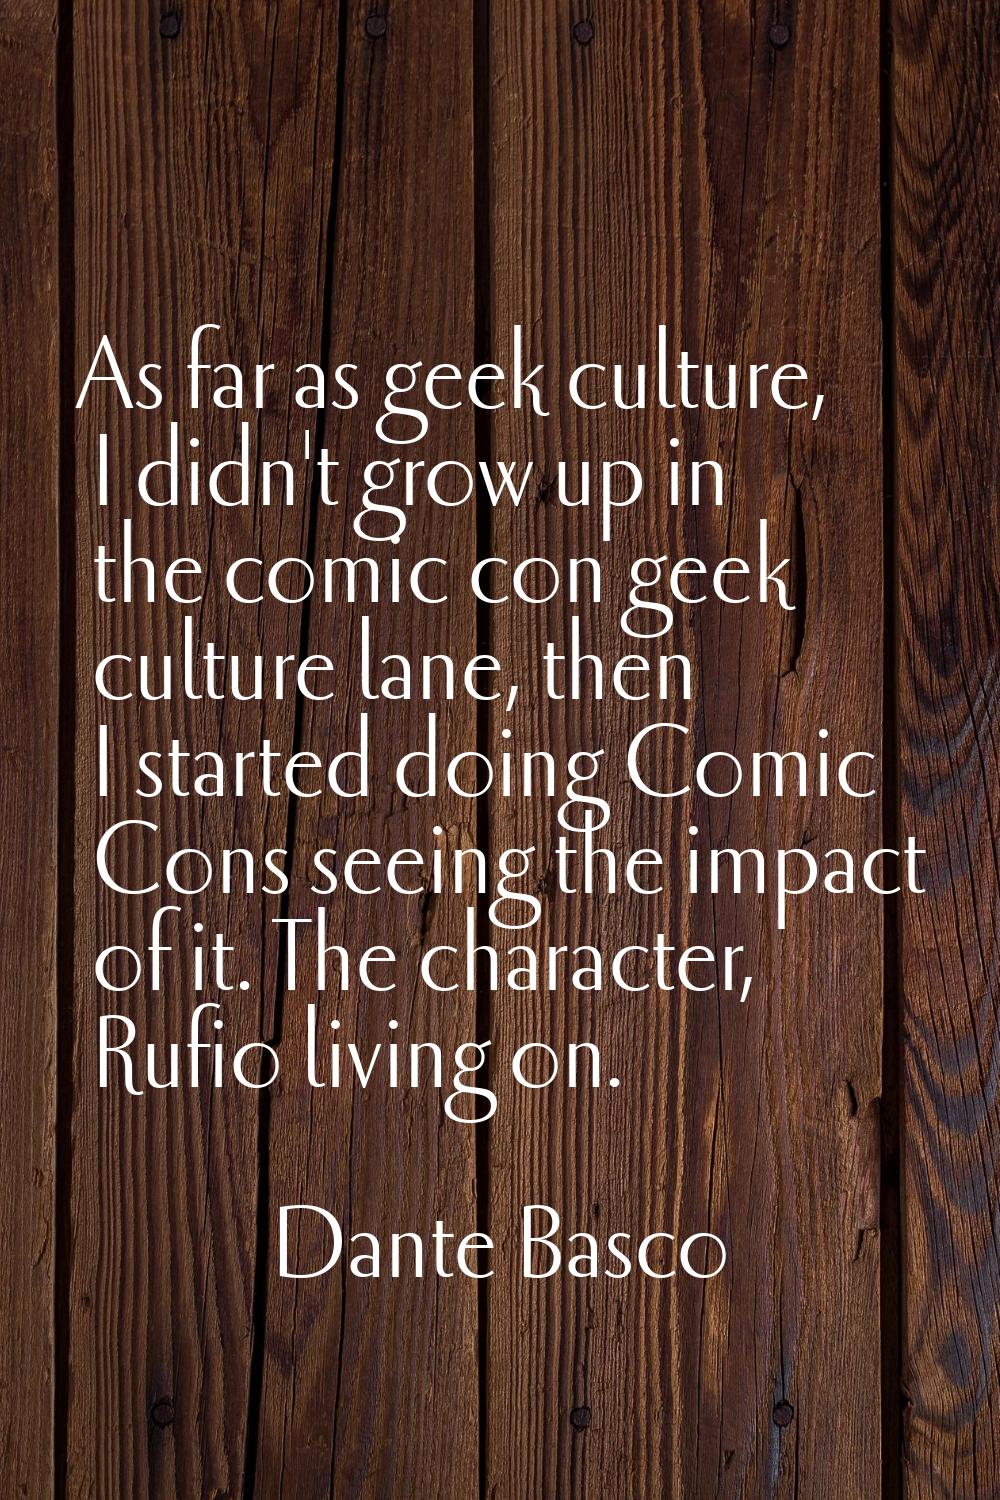 As far as geek culture, I didn't grow up in the comic con geek culture lane, then I started doing C